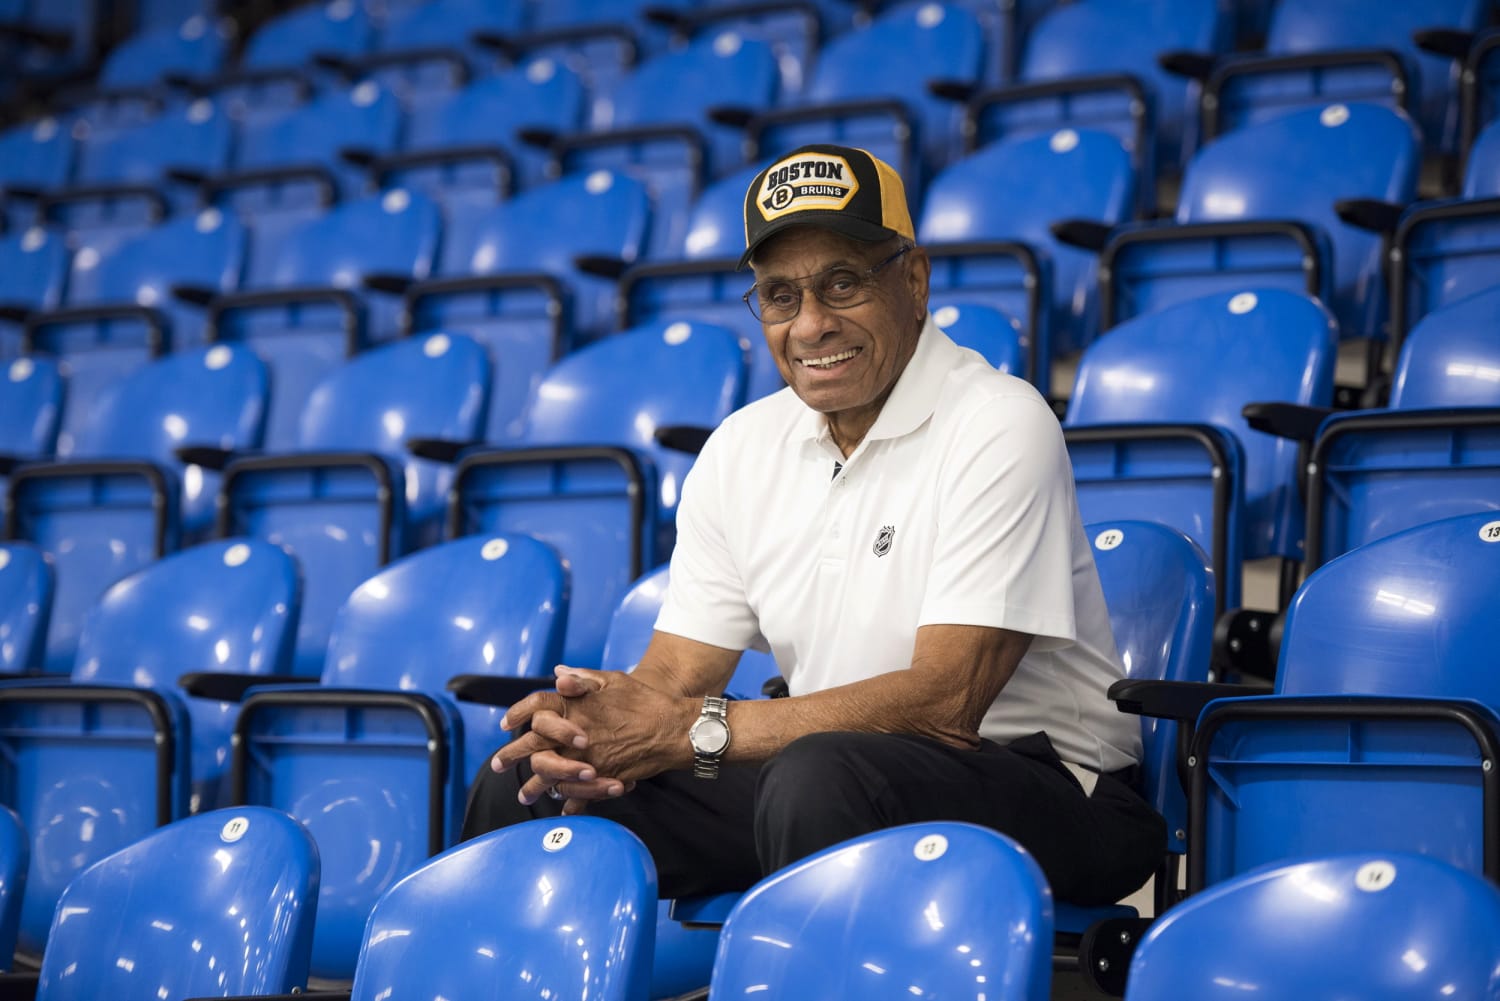 On this day in history, Willie O'Ree made history in Boston by